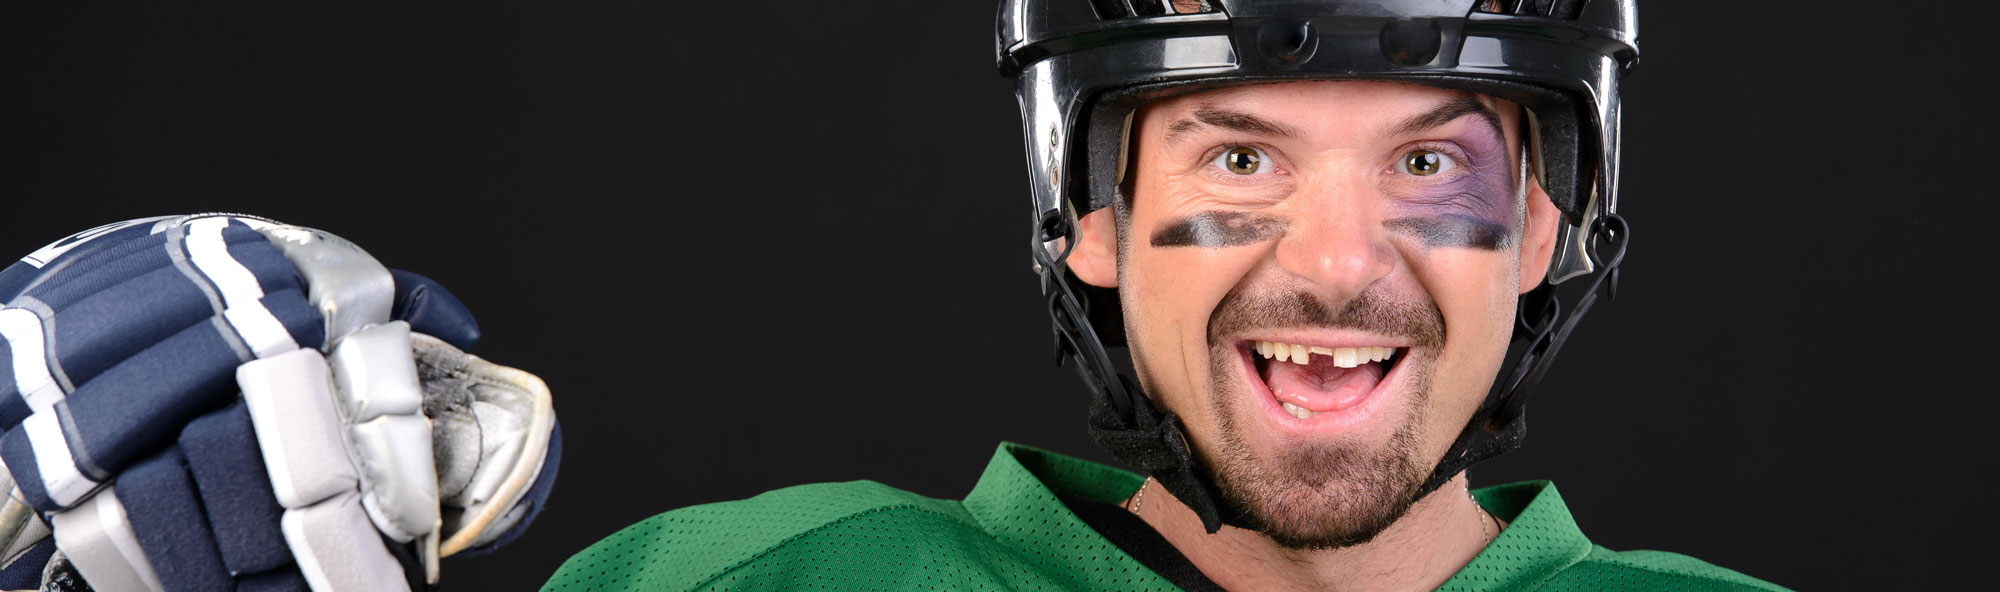 hockey player missing a tooth and smiling